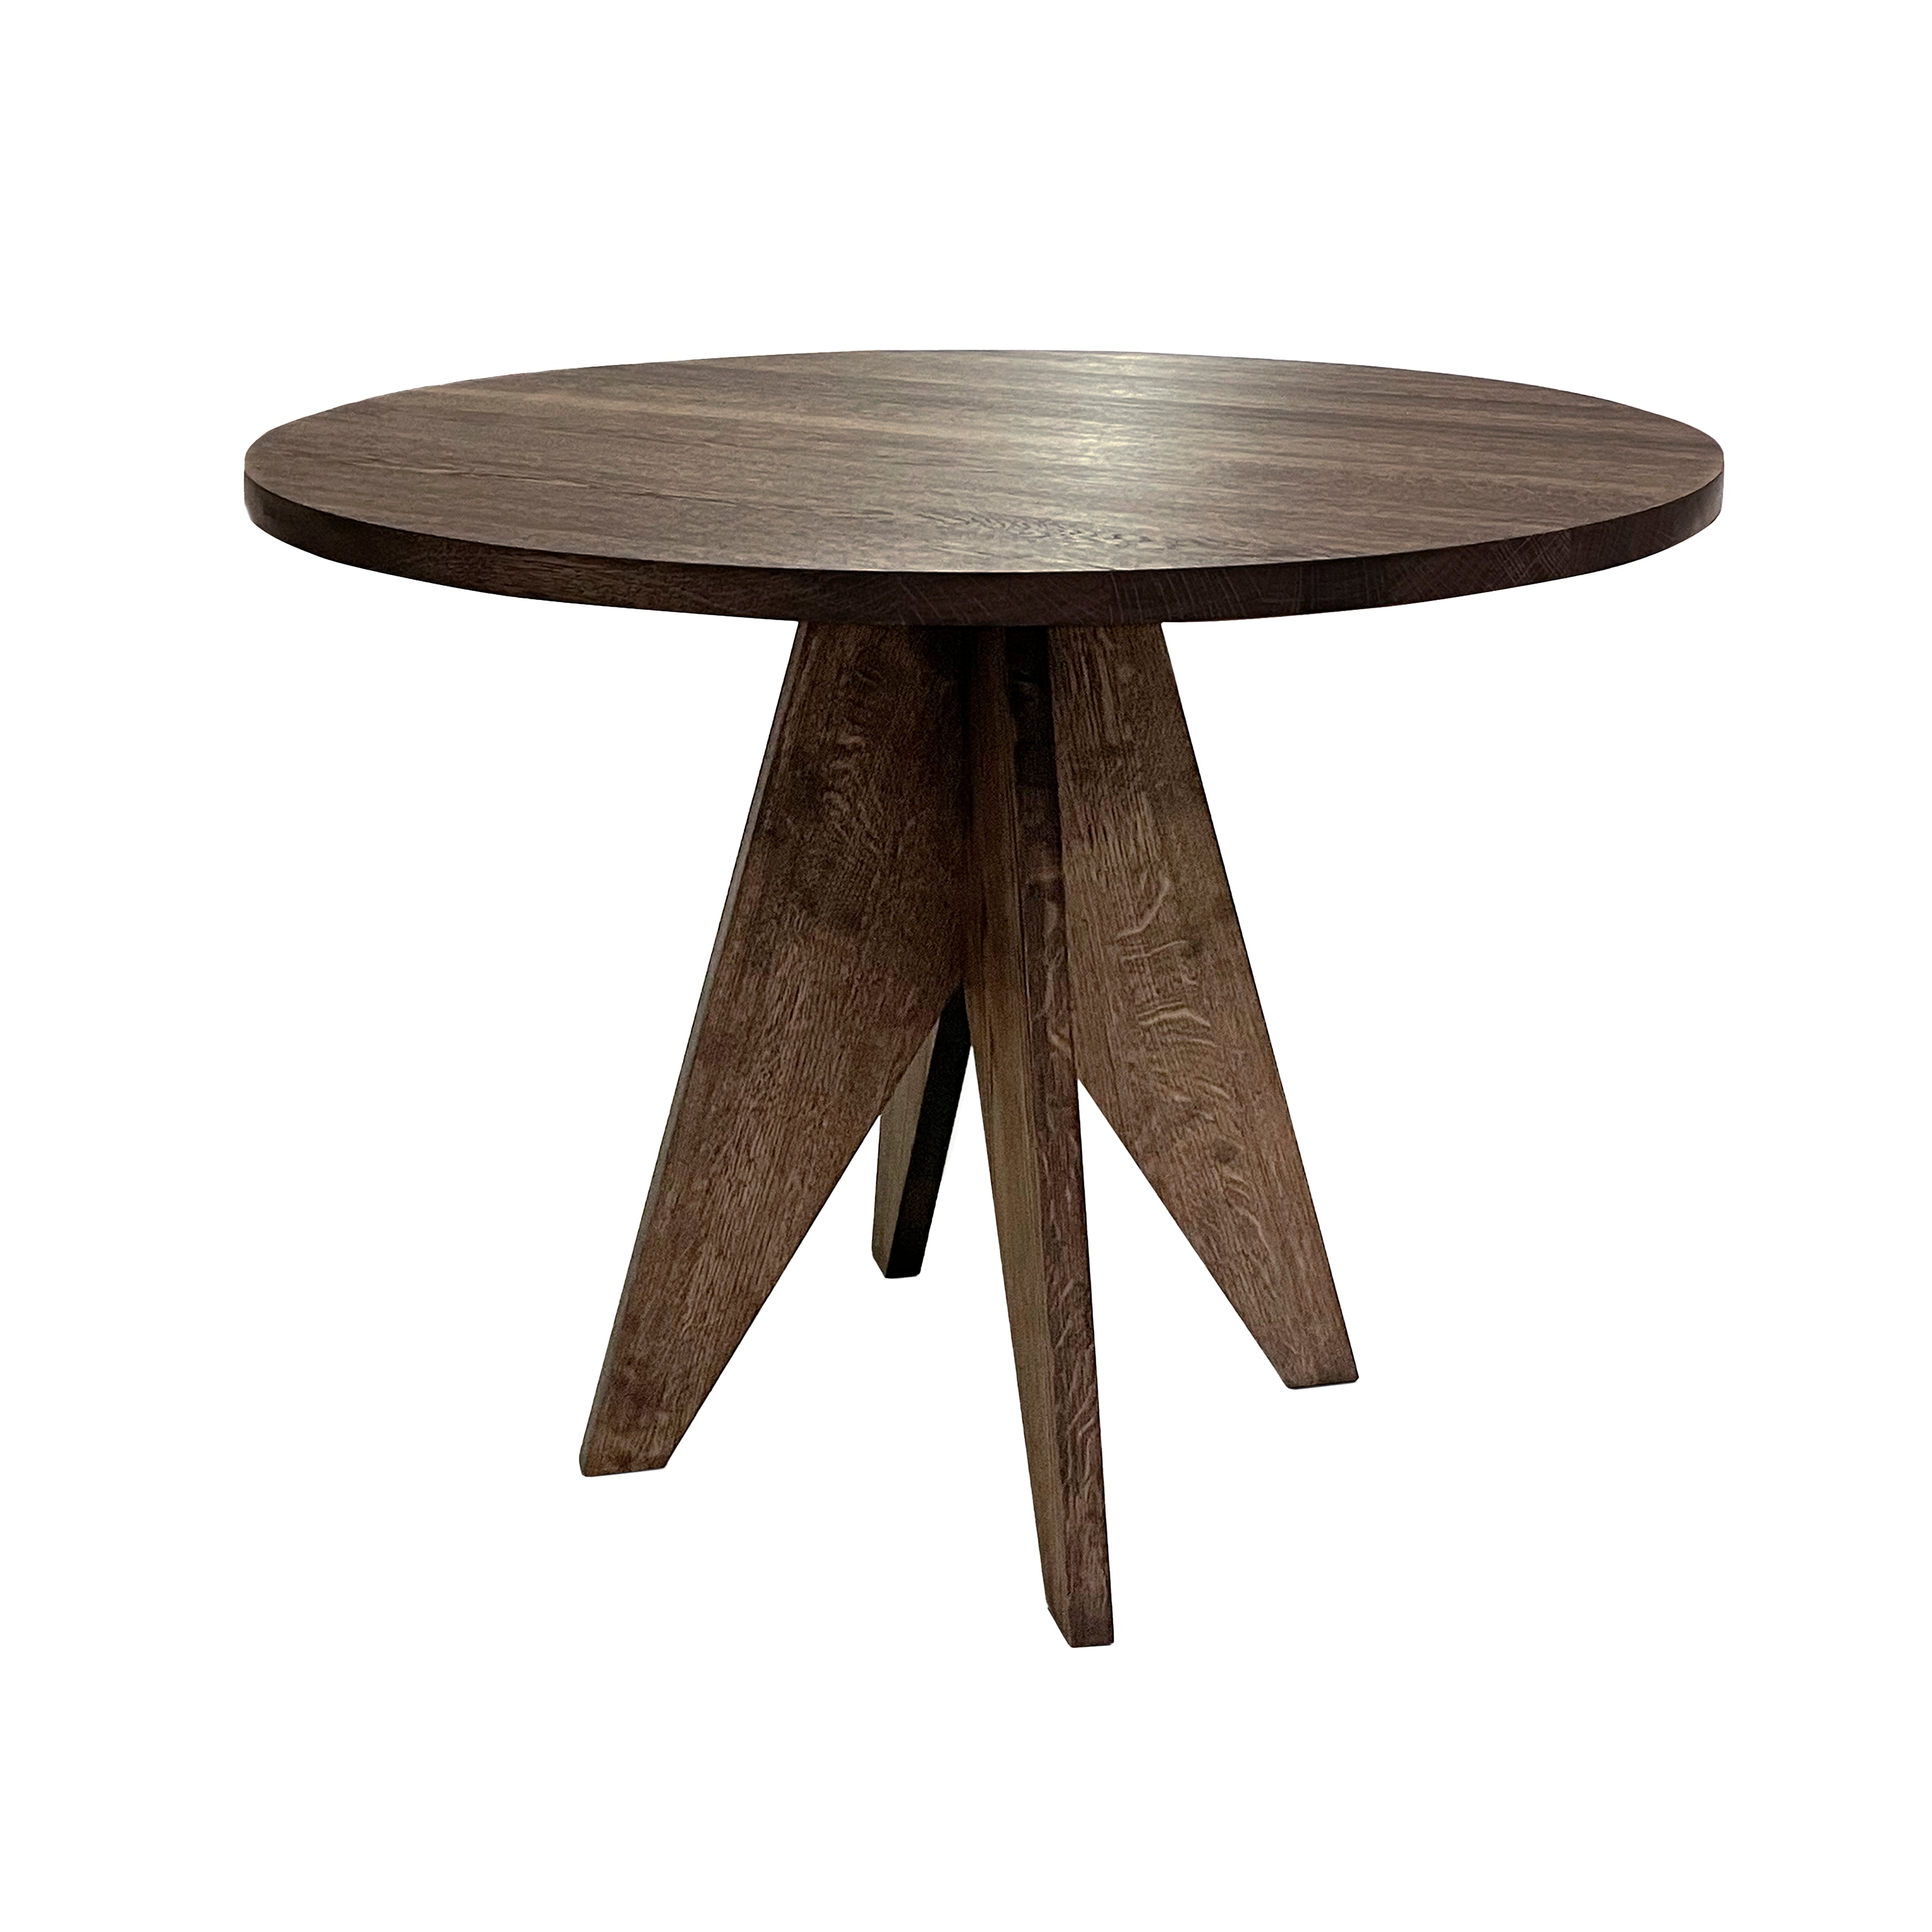 Pose Round Dining Table: Small - 39.4